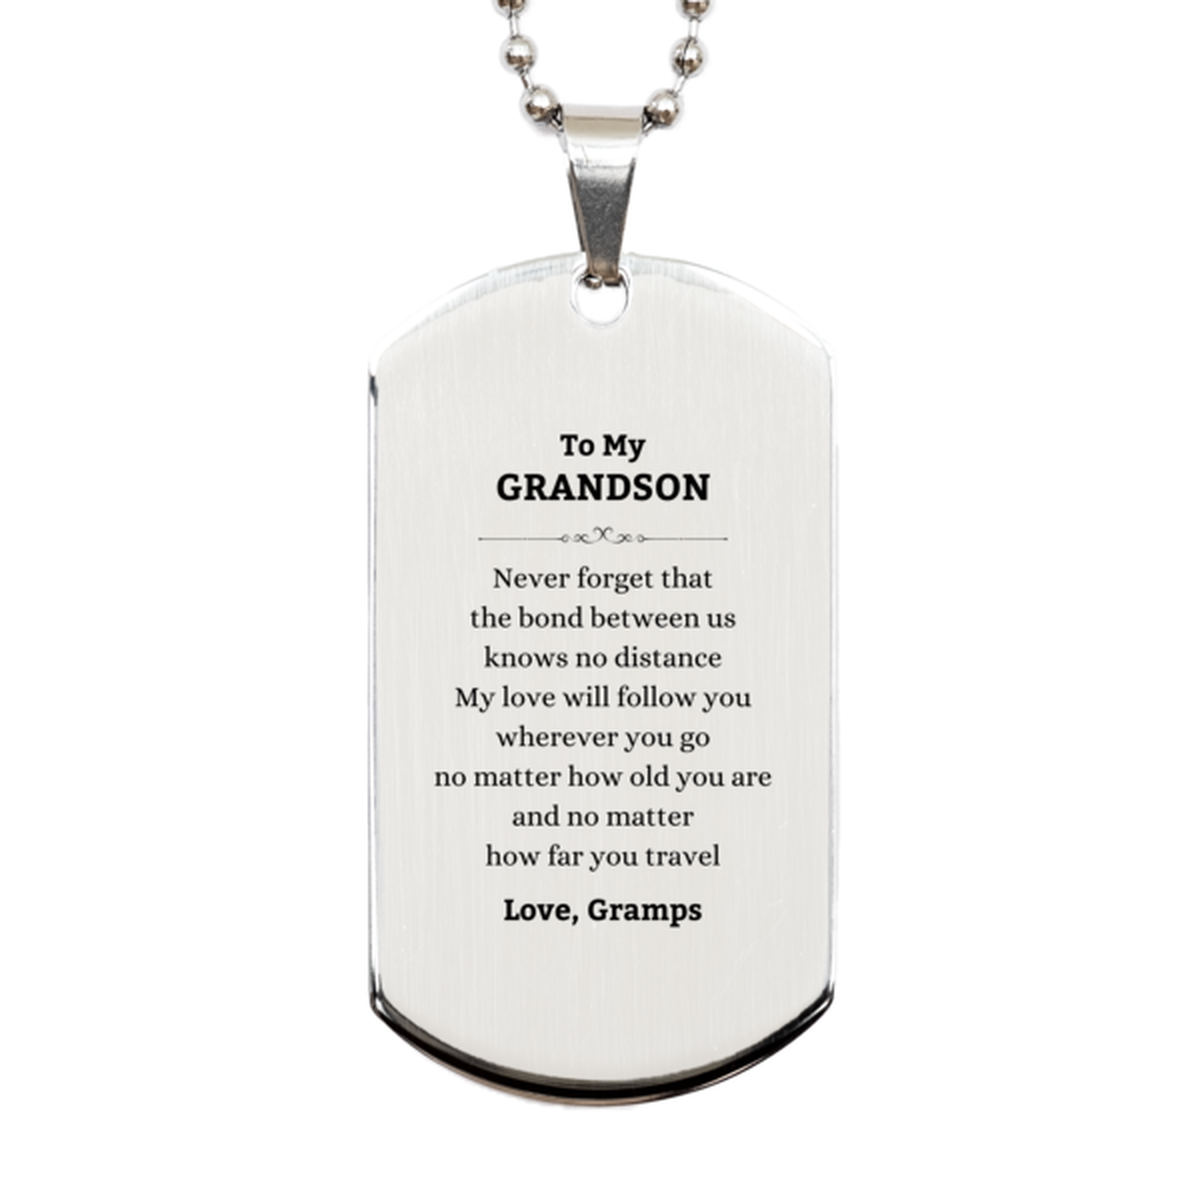 Grandson Birthday Gifts from Gramps, Adjustable Silver Dog Tag for Grandson Christmas Graduation Unique Gifts Grandson Never forget that the bond between us knows no distance. Love, Gramps